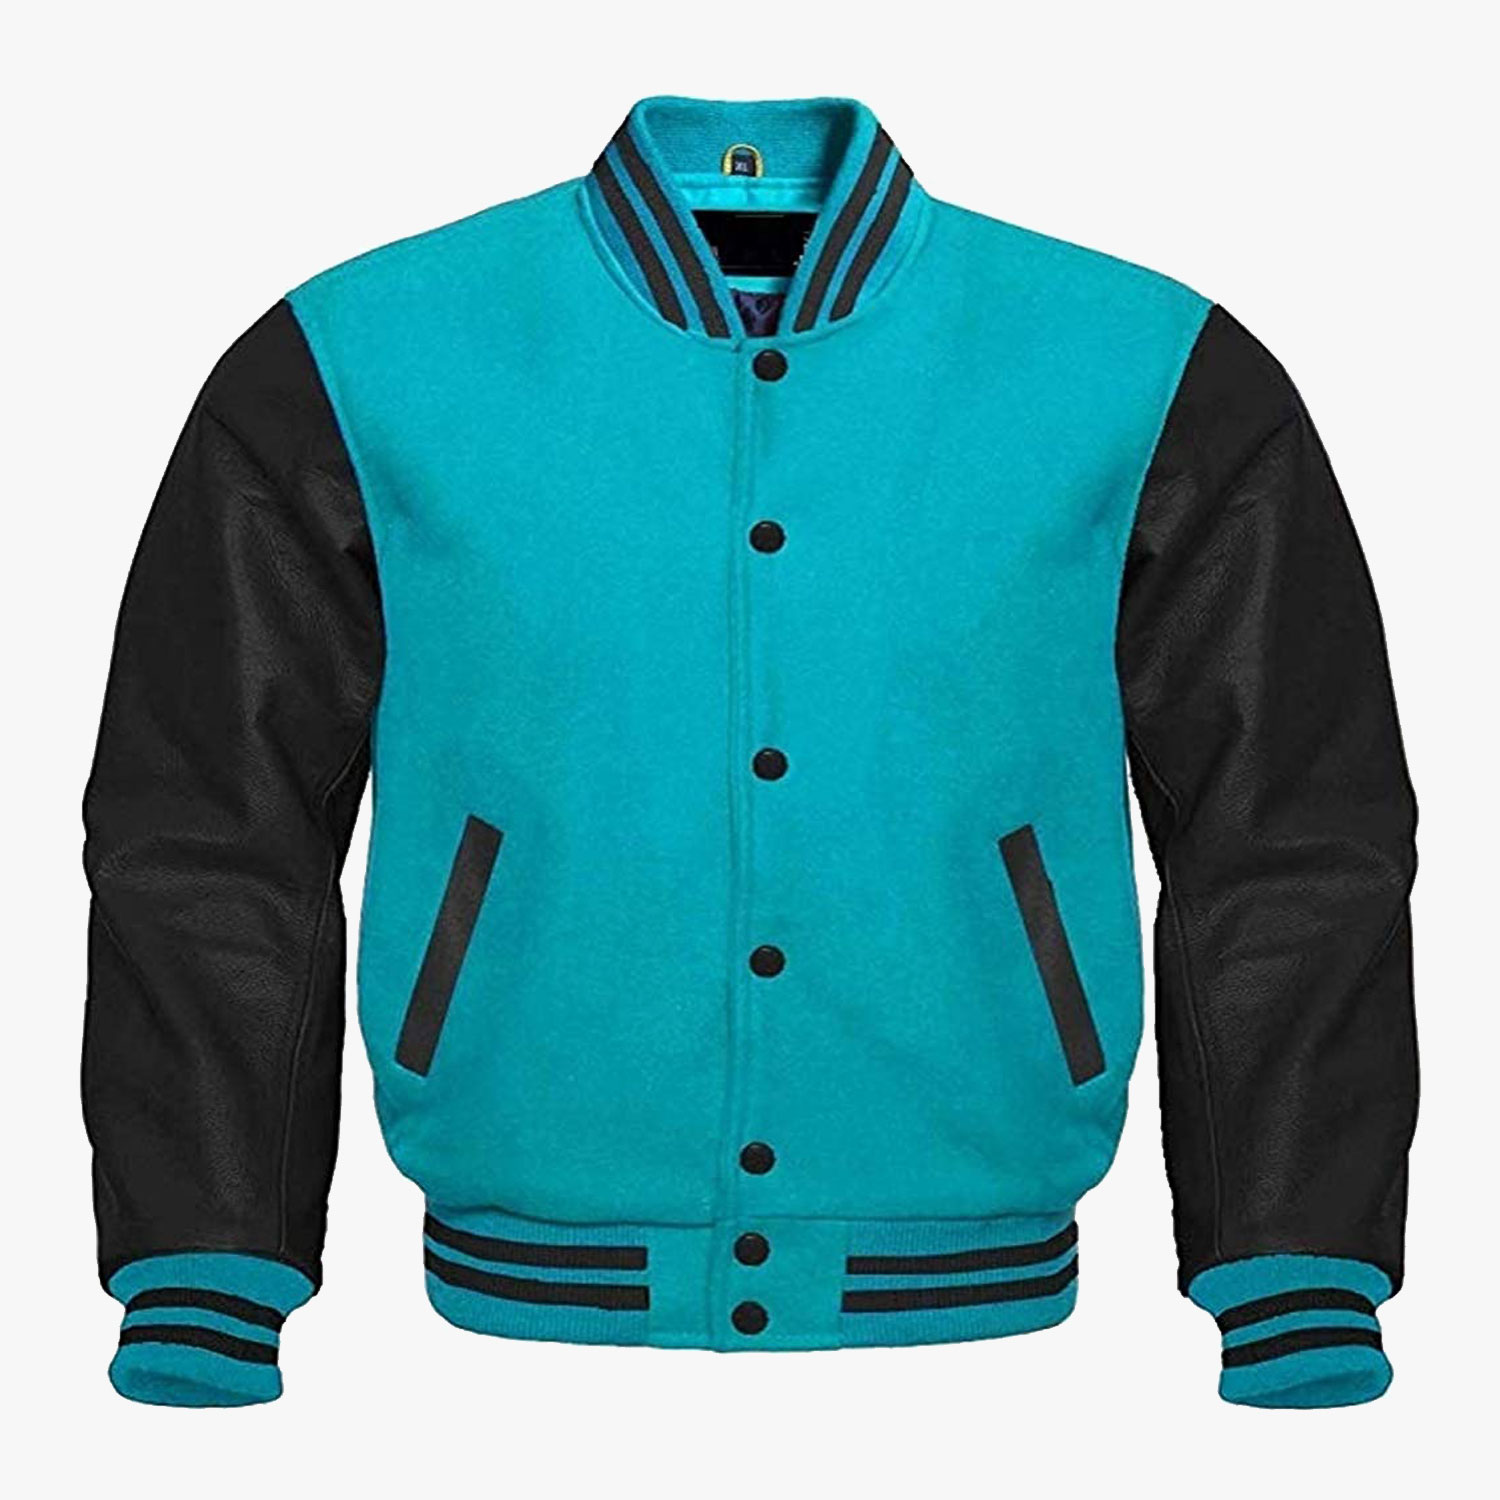 Custom Leather sleeve Varsity jackets in Blue and Black colour | Wholesale